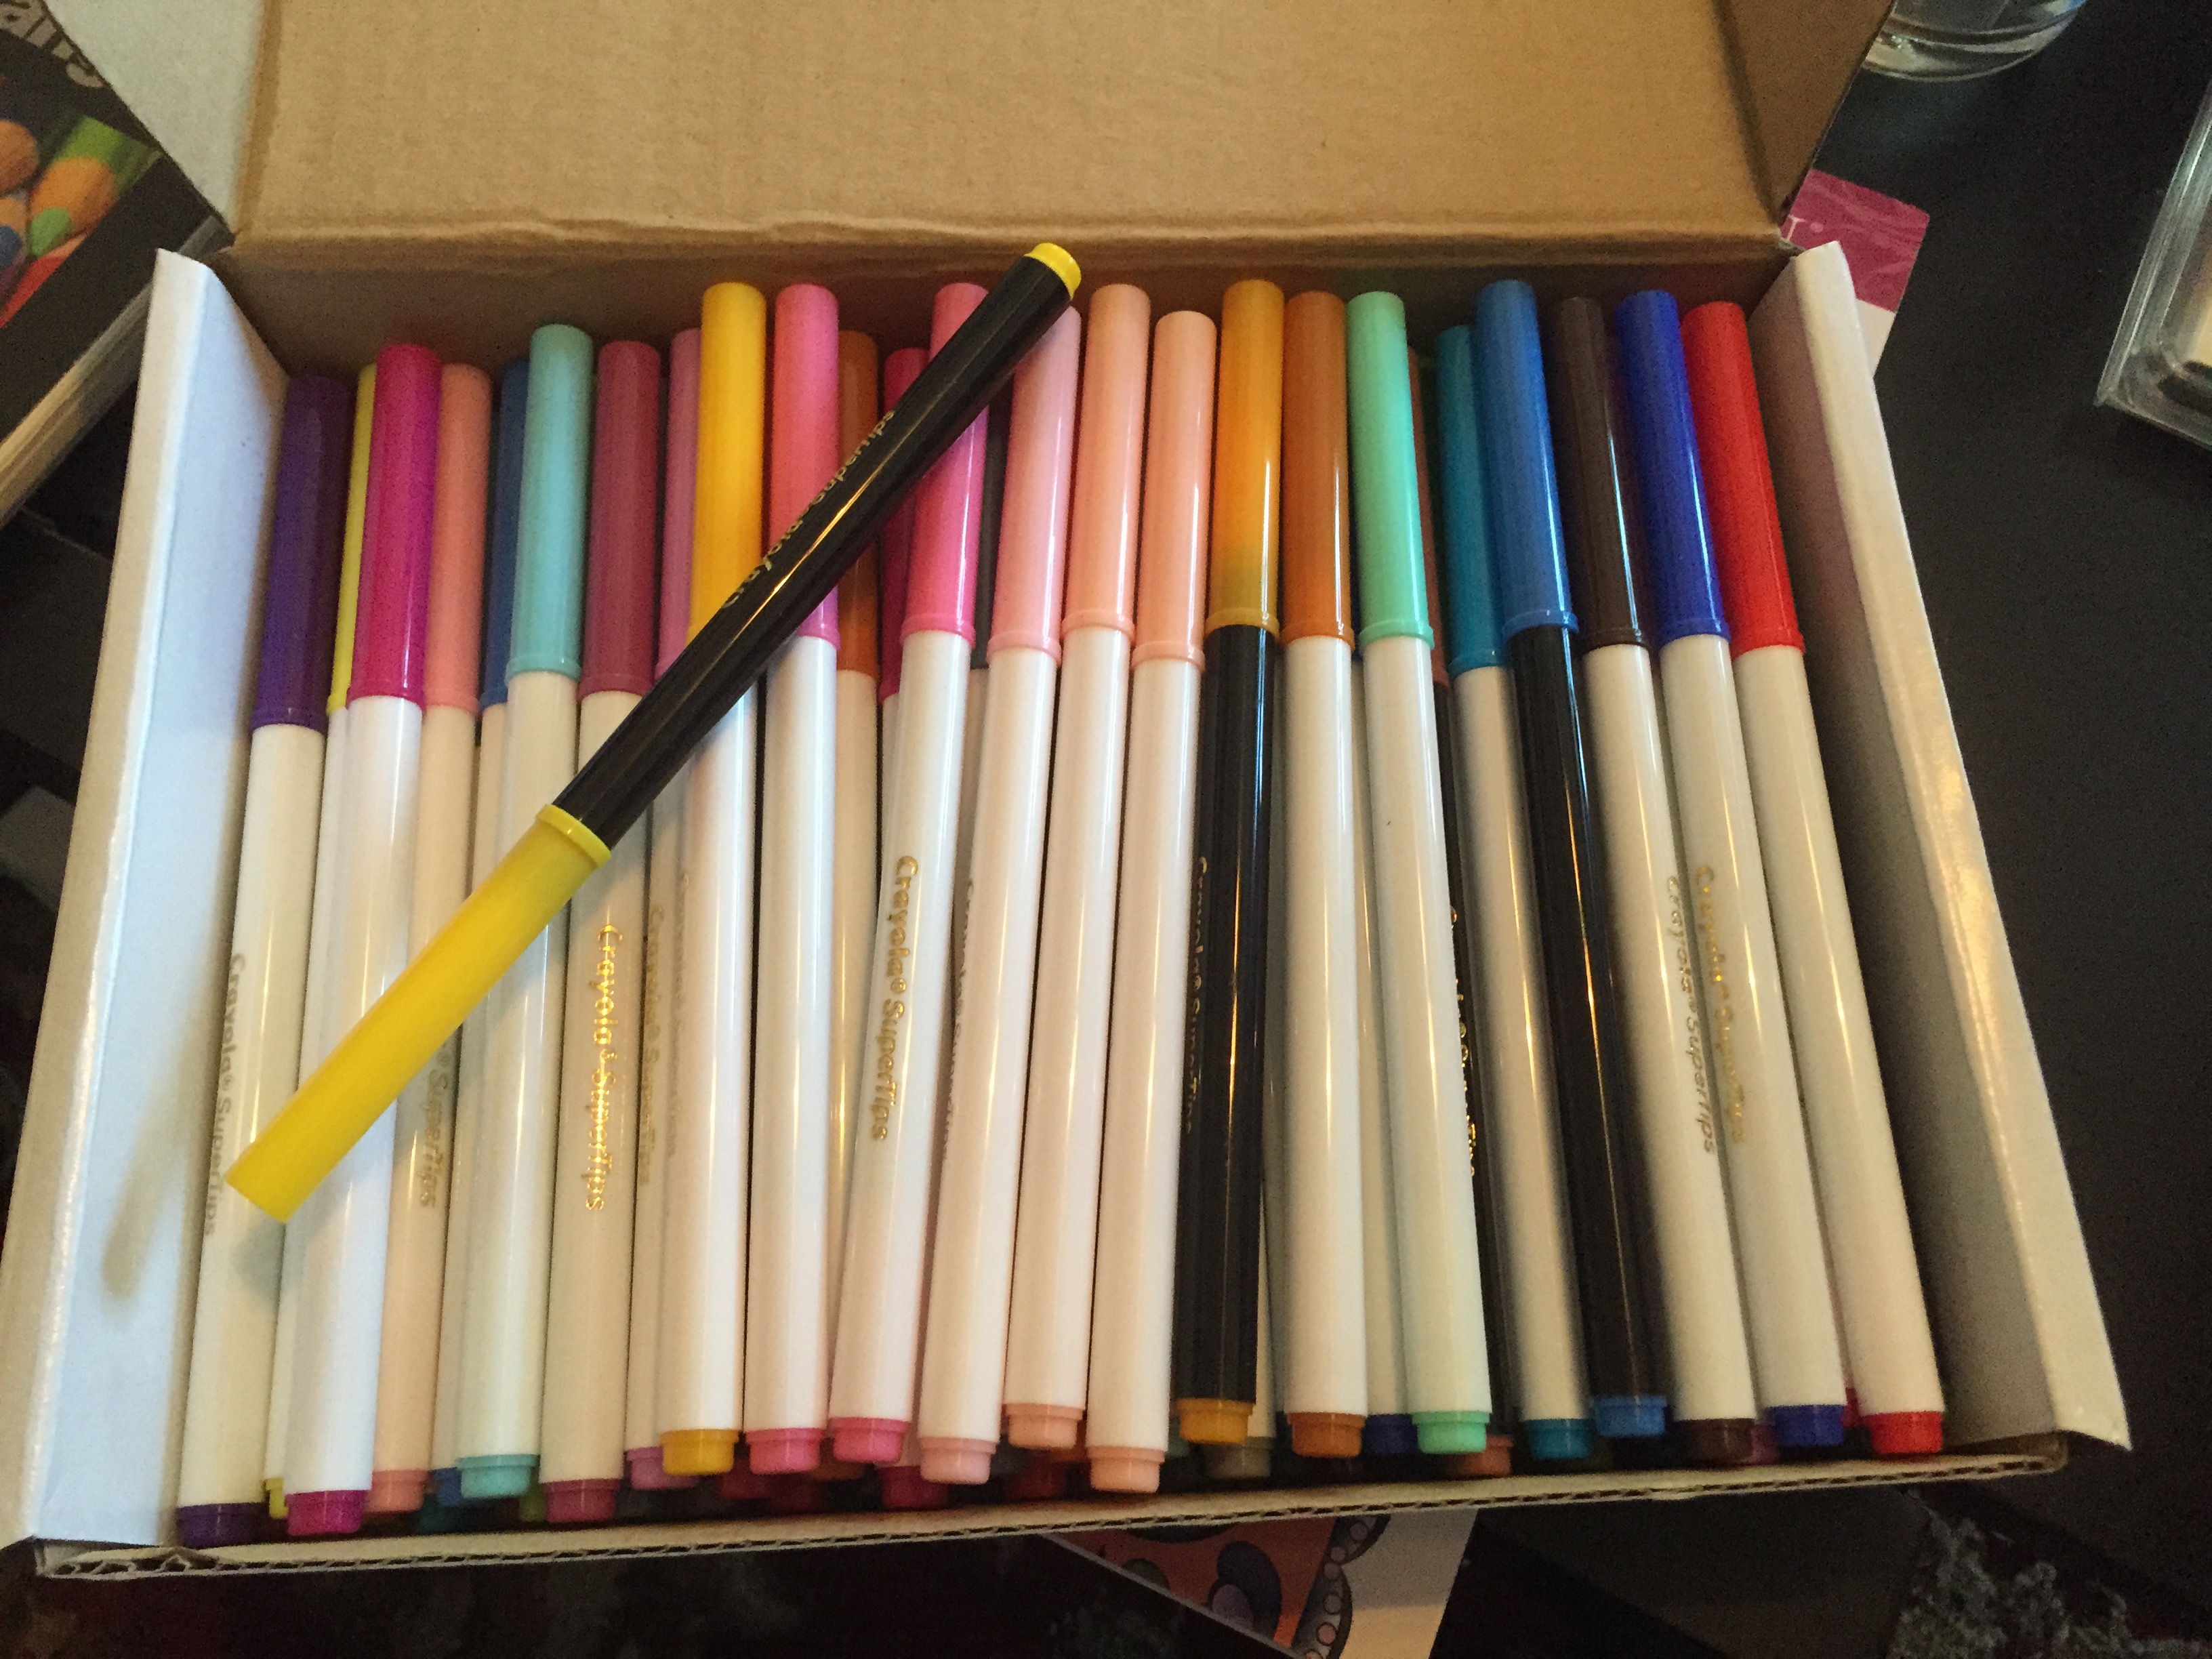 Crayola Super Tips Markers (2015): What's Inside the Box, 20 and